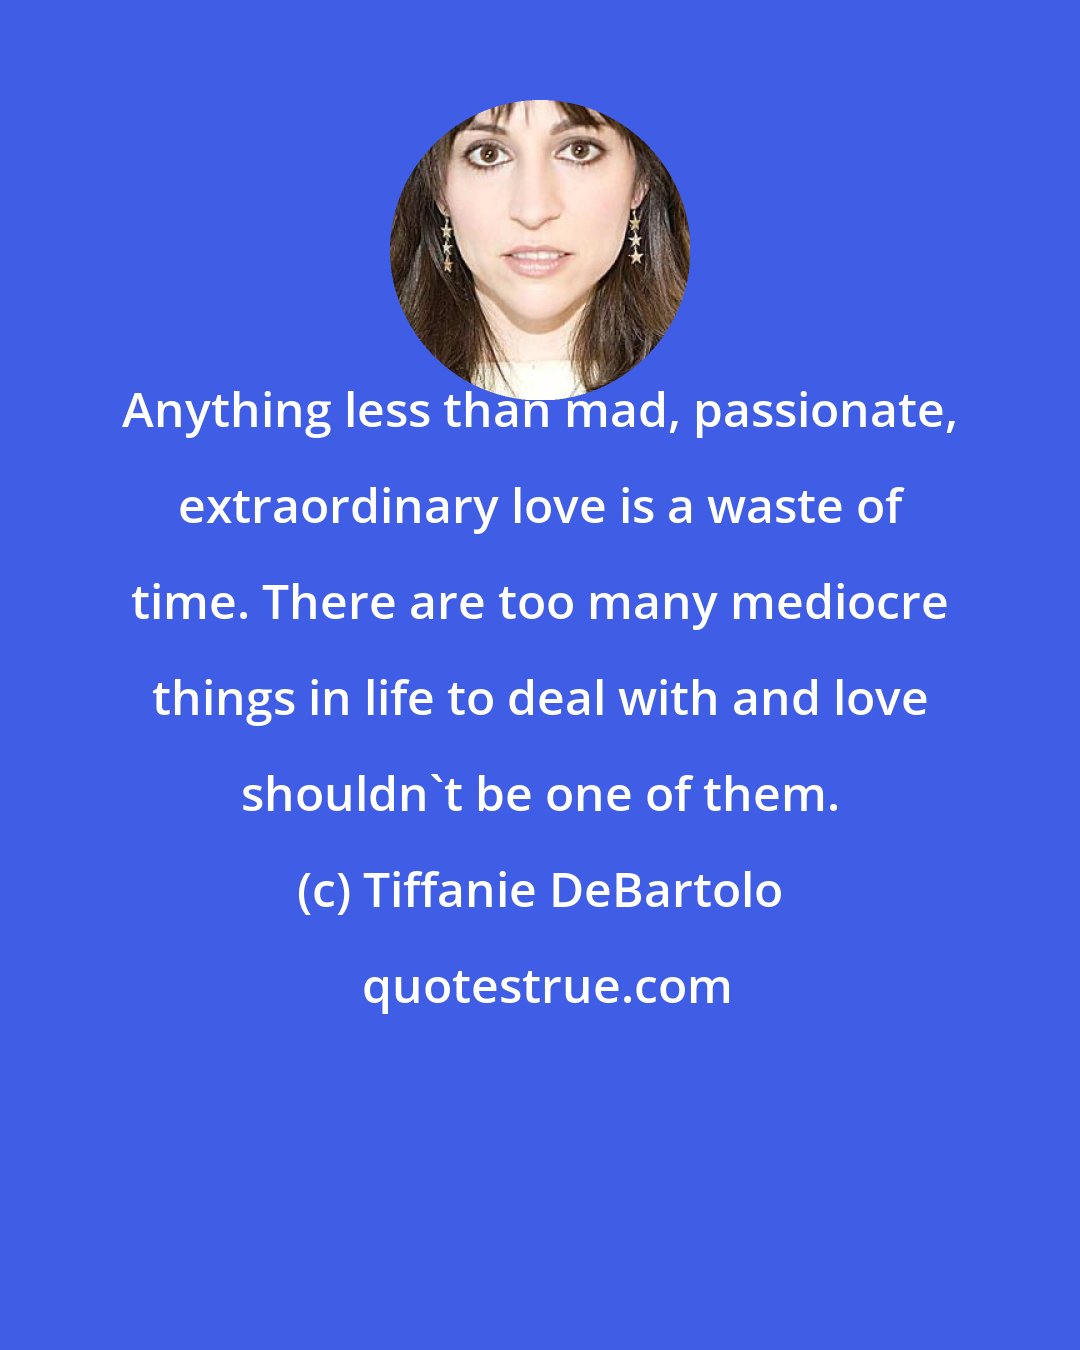 Tiffanie DeBartolo: Anything less than mad, passionate, extraordinary love is a waste of time. There are too many mediocre things in life to deal with and love shouldn't be one of them.